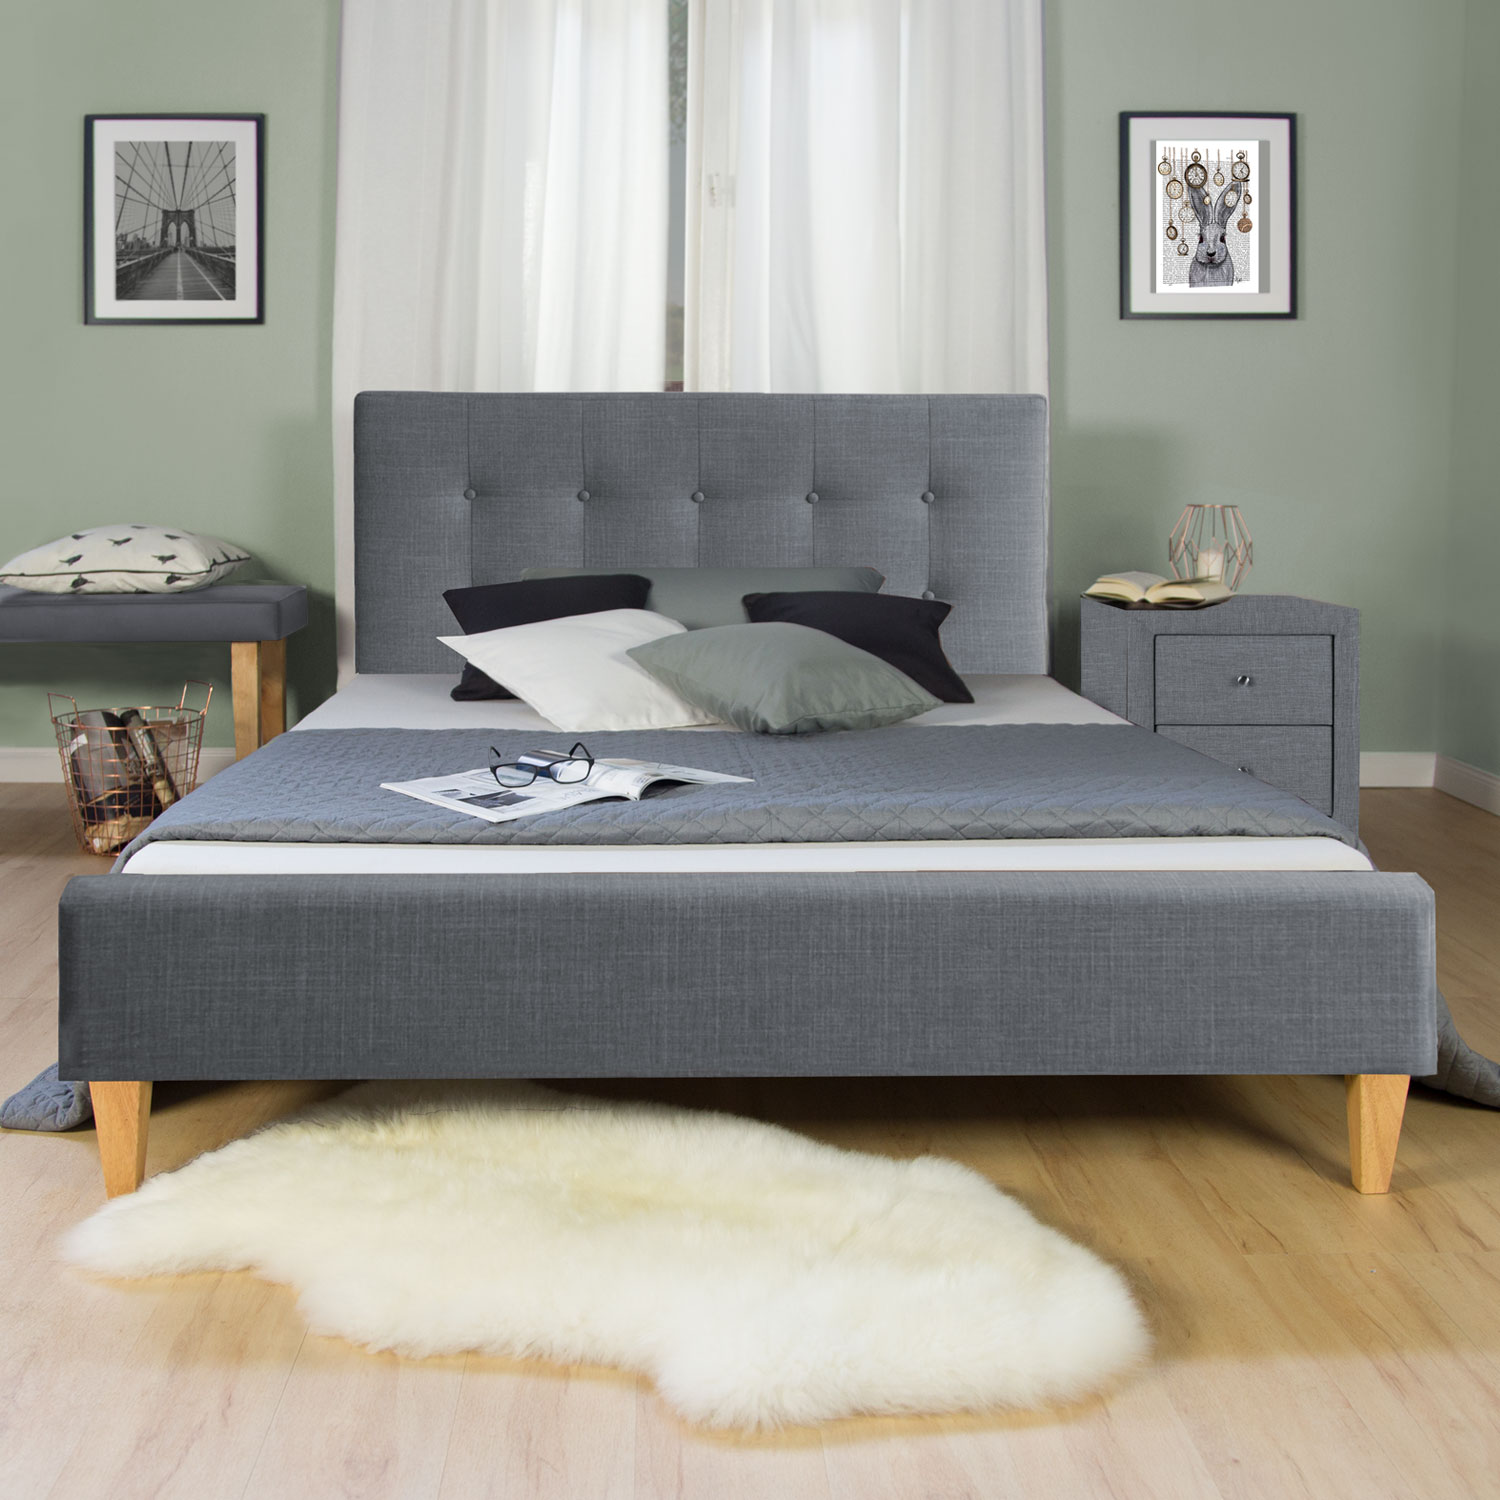 Upholstered Bed with Mattress 120x200 Slatted Frame Double Bed Fabric Bedstead Grey